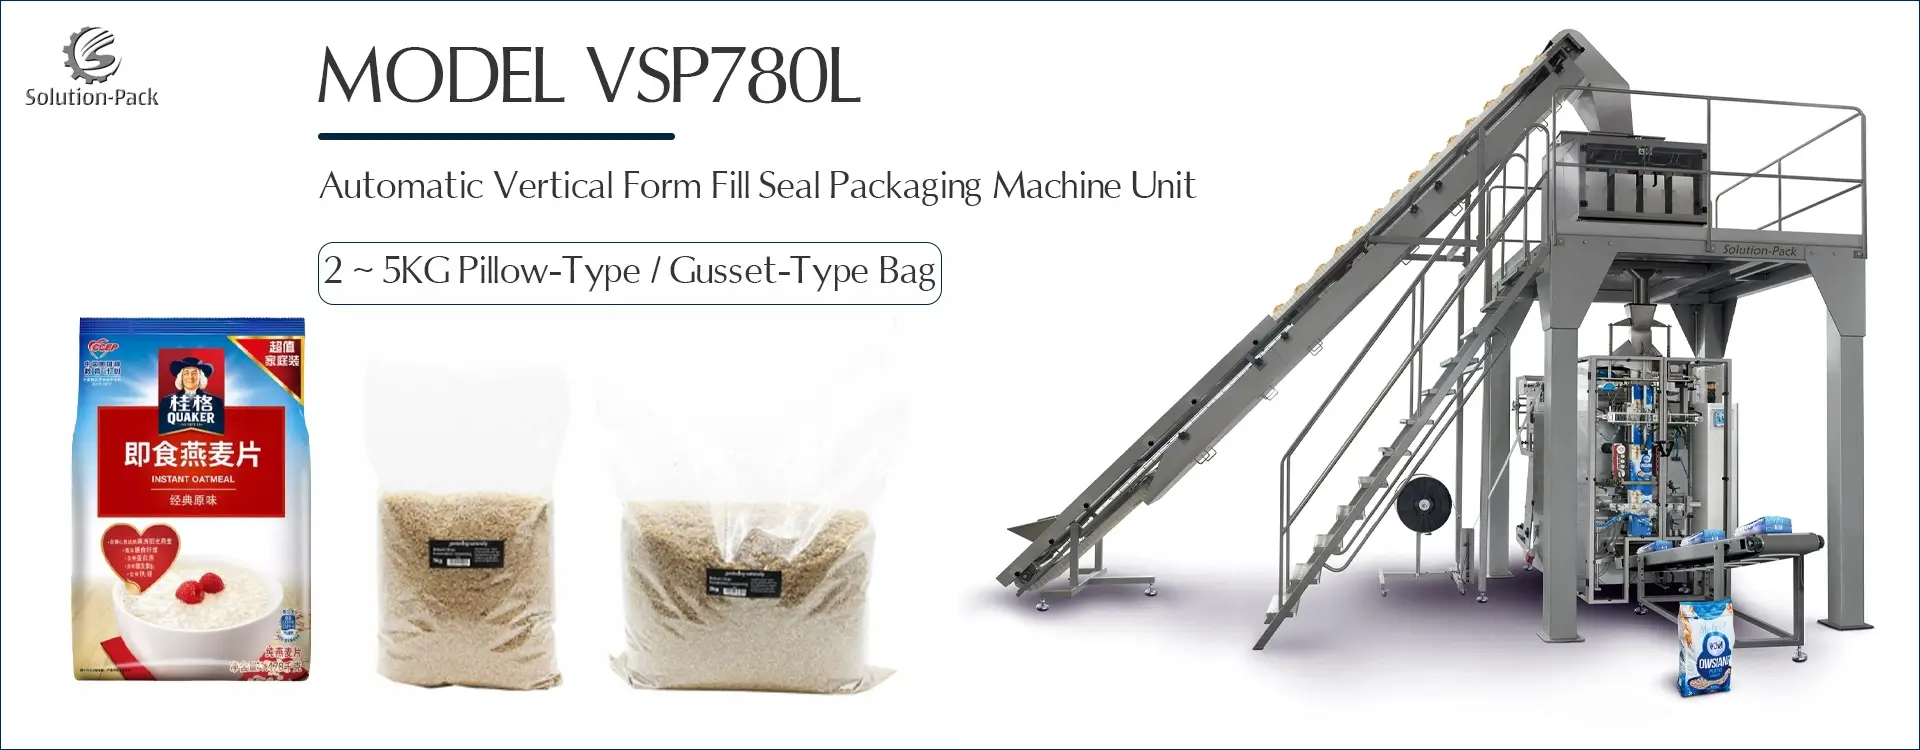 Model VSP780L Automatic Vertical Packaging Machine Unit | Solution-Pack (Heading Banner Picture)